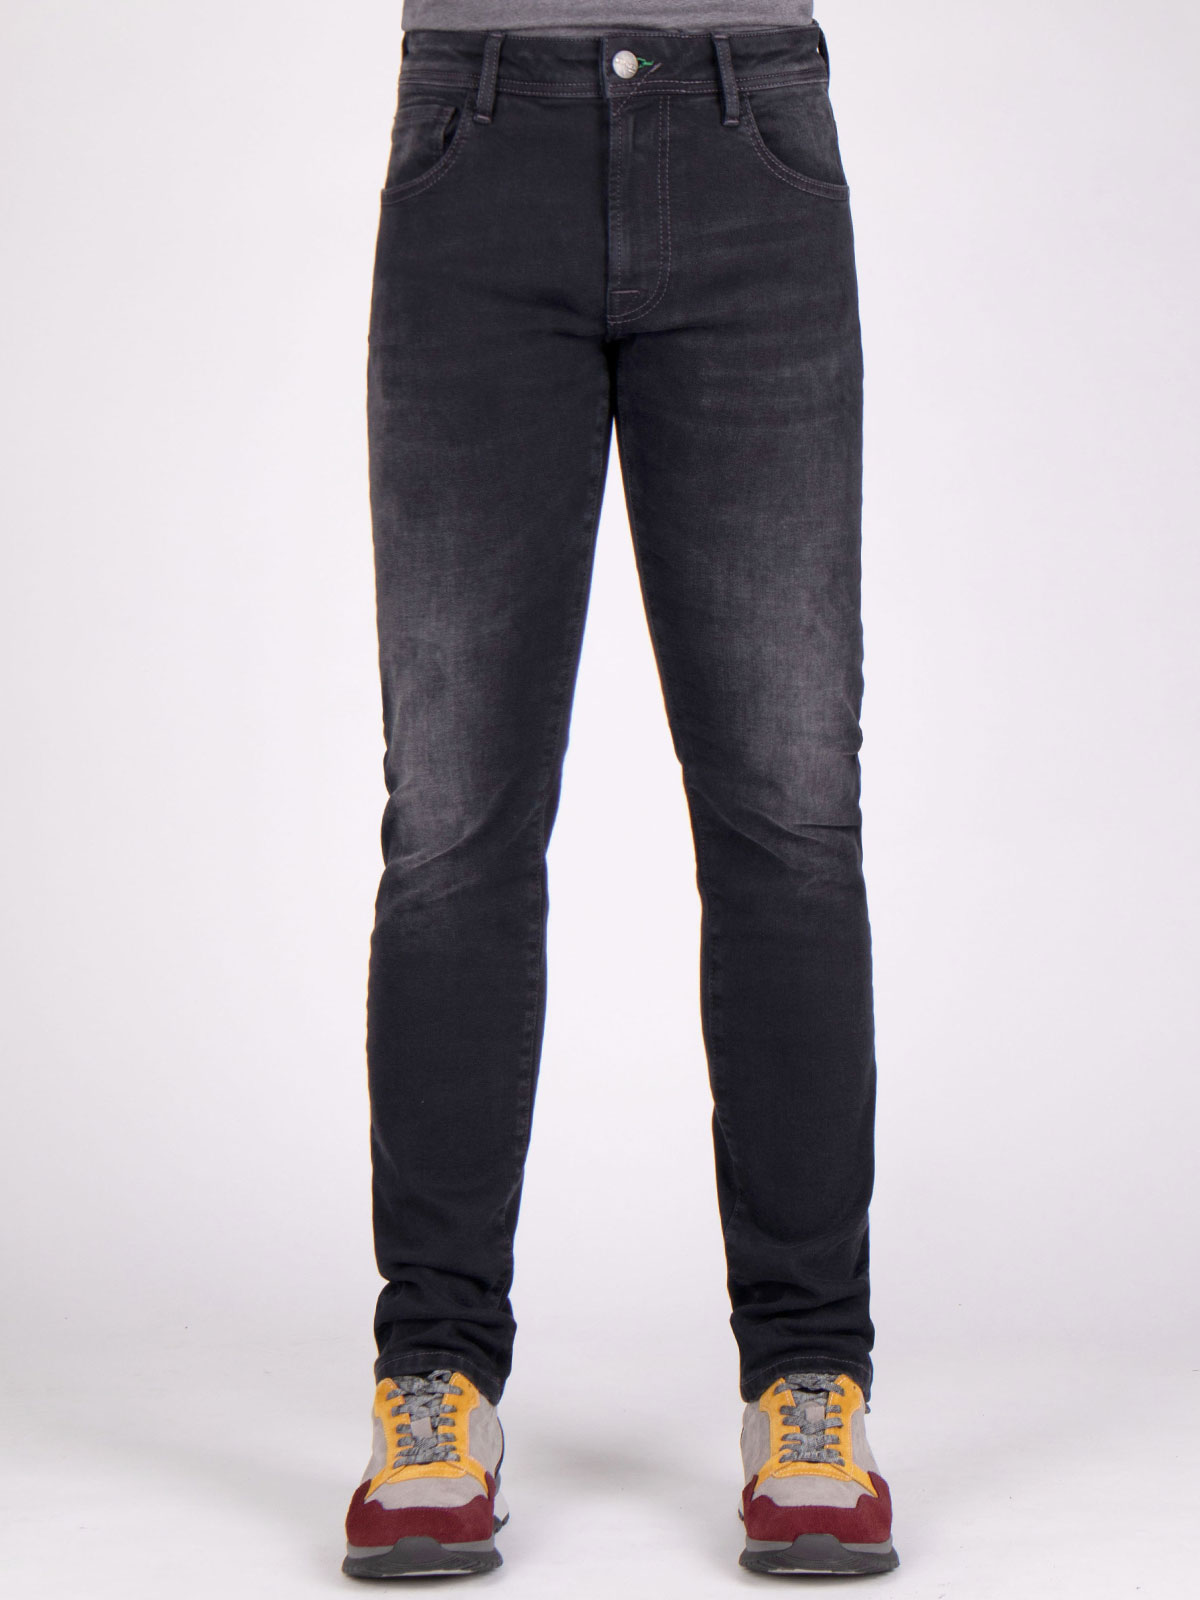 Black fitted jeans with elastane - 62140 € 30.93 img2